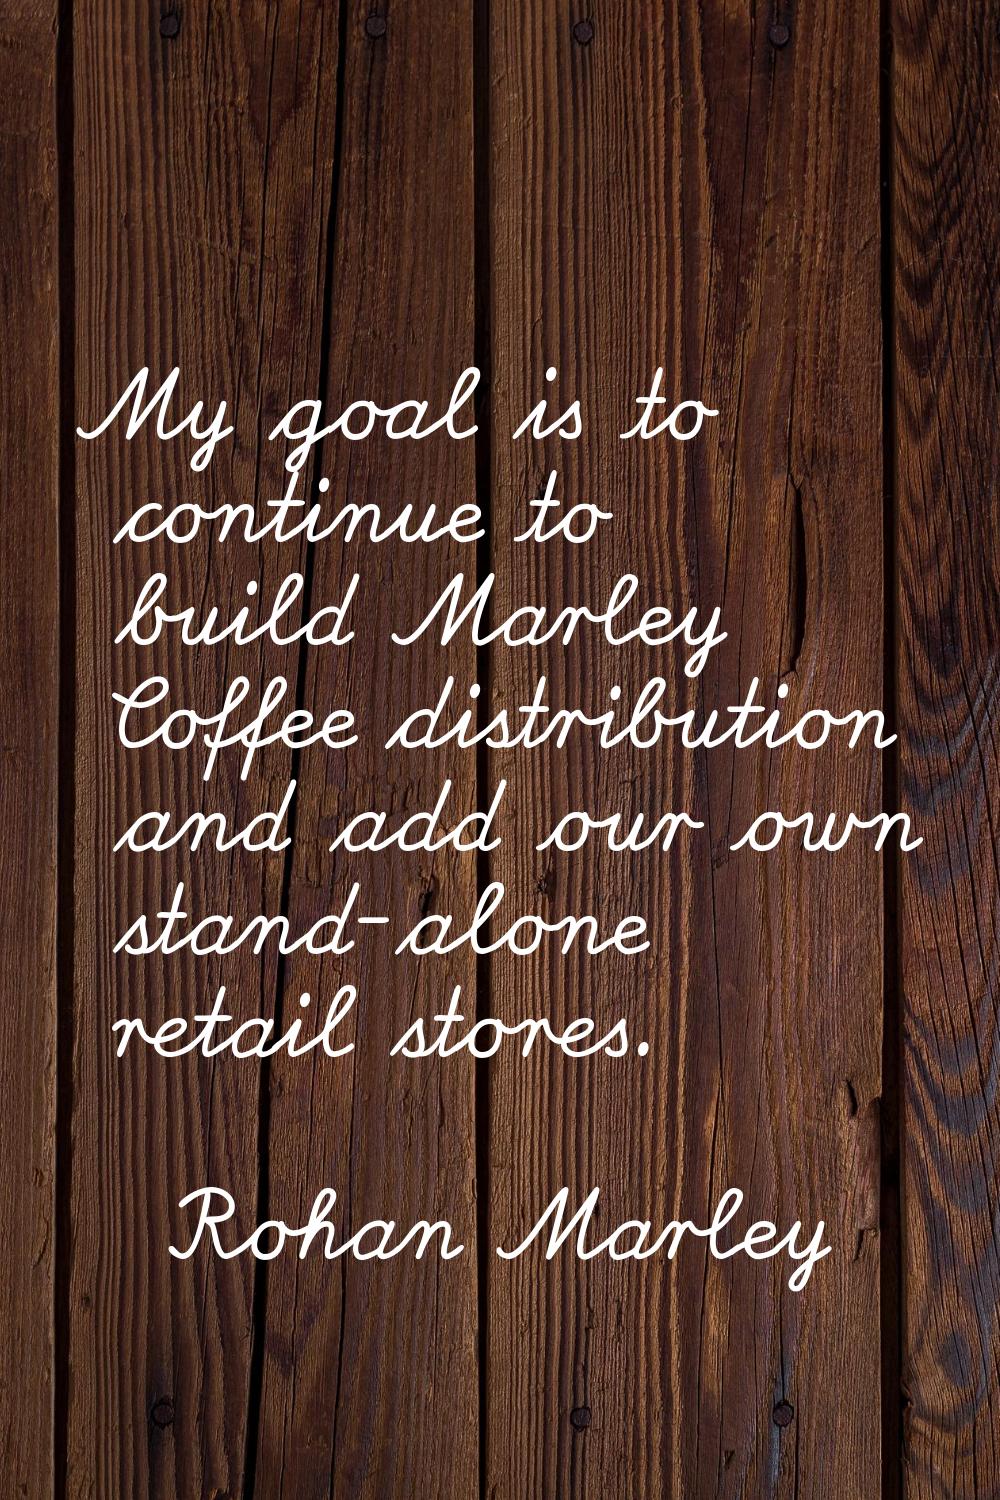 My goal is to continue to build Marley Coffee distribution and add our own stand-alone retail store